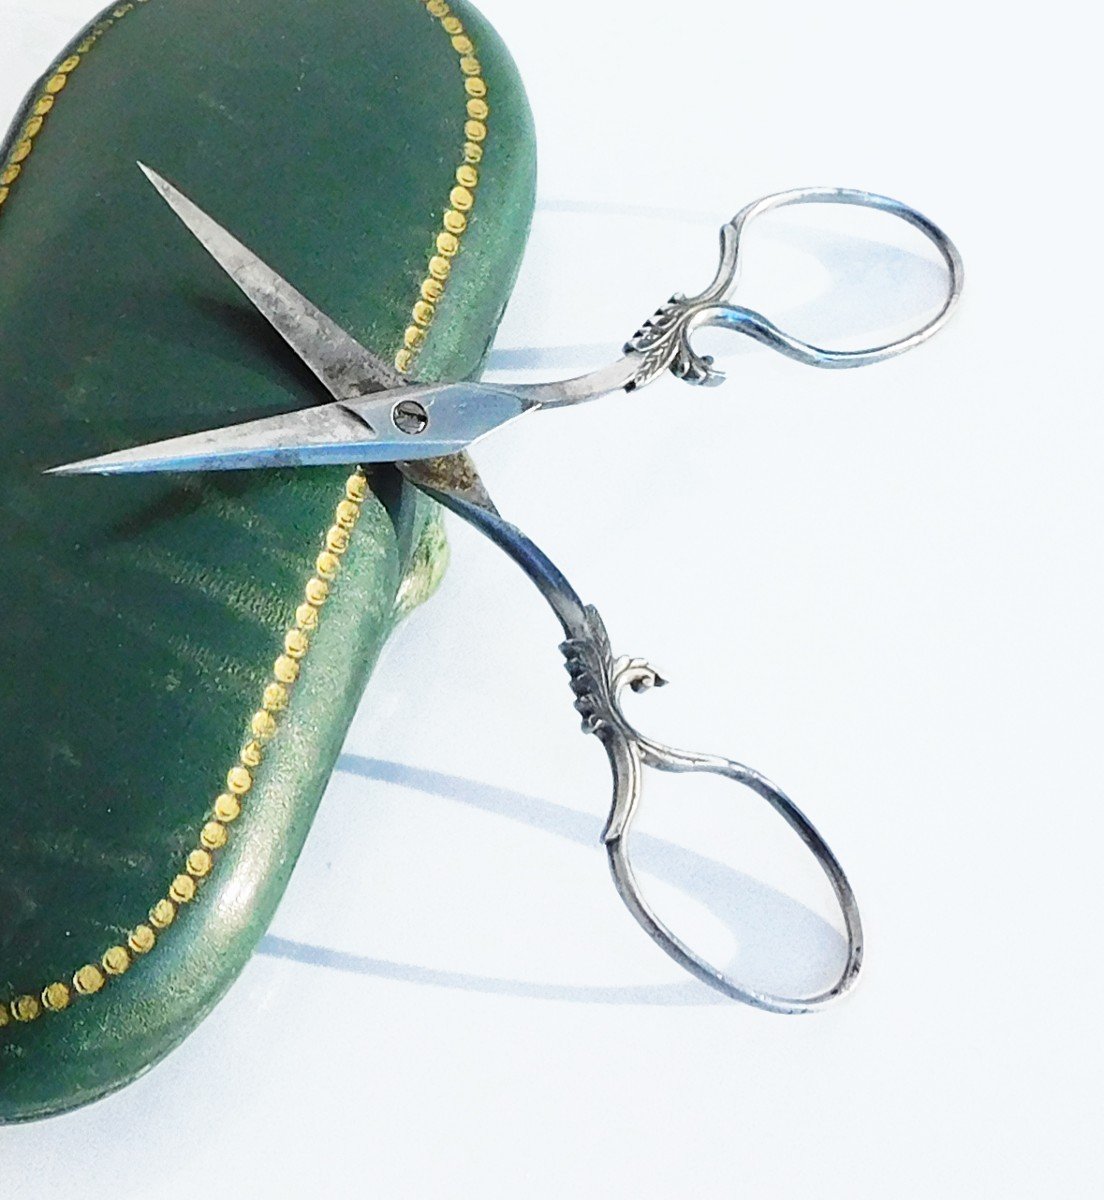 Pair Of Old Embroidery Steel Scissors Sewing Necessary Late 19th Century Early 20th Century-photo-2